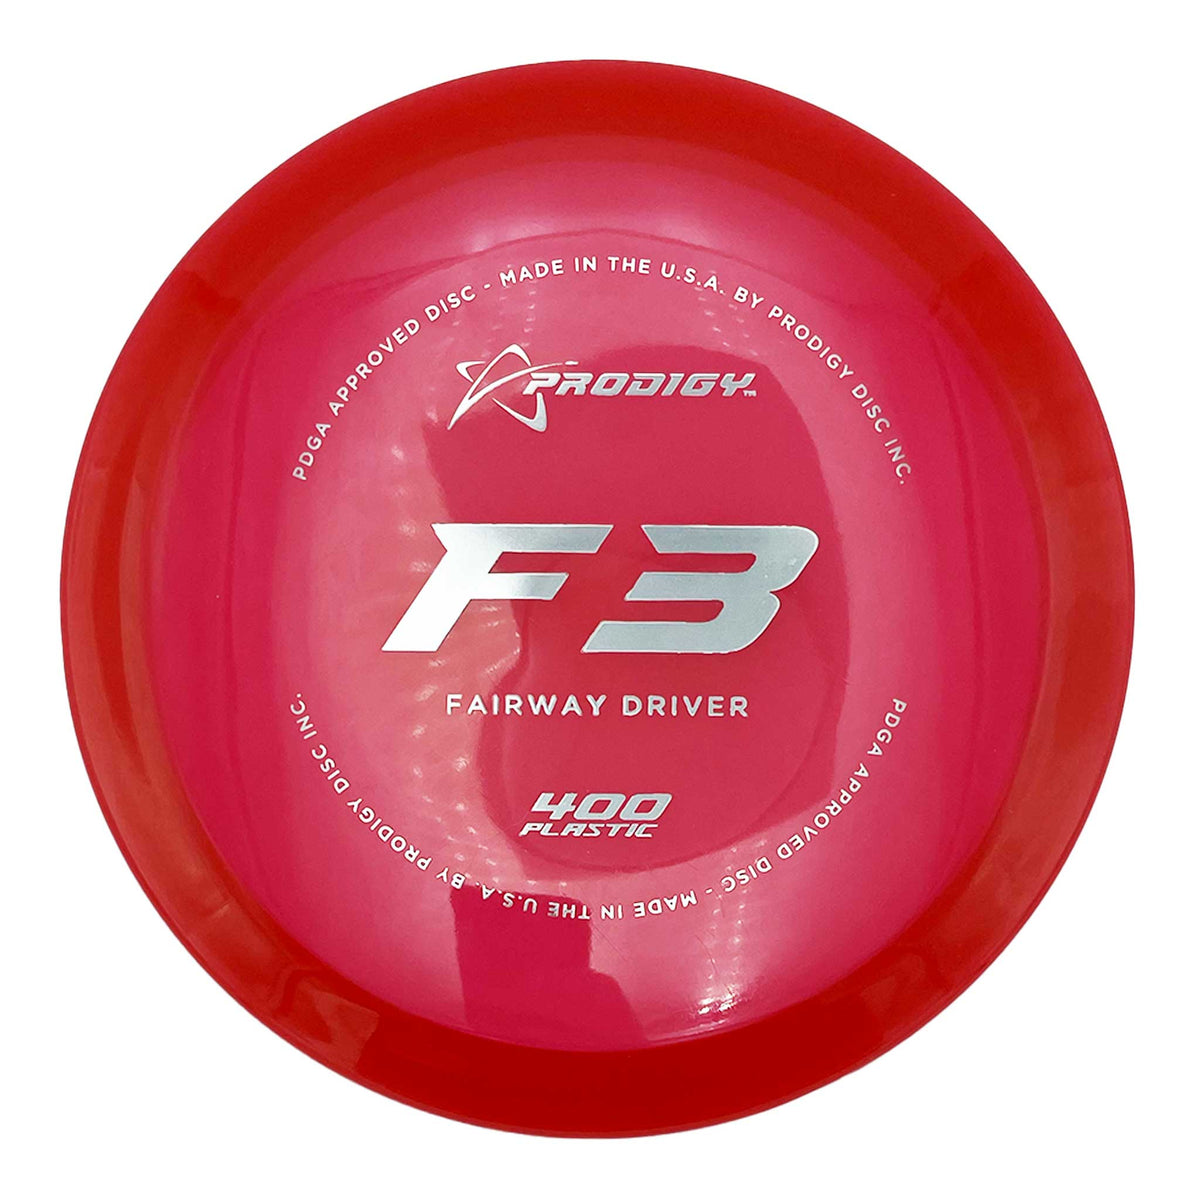 Prodigy 400 F3 Fairway Driver - red